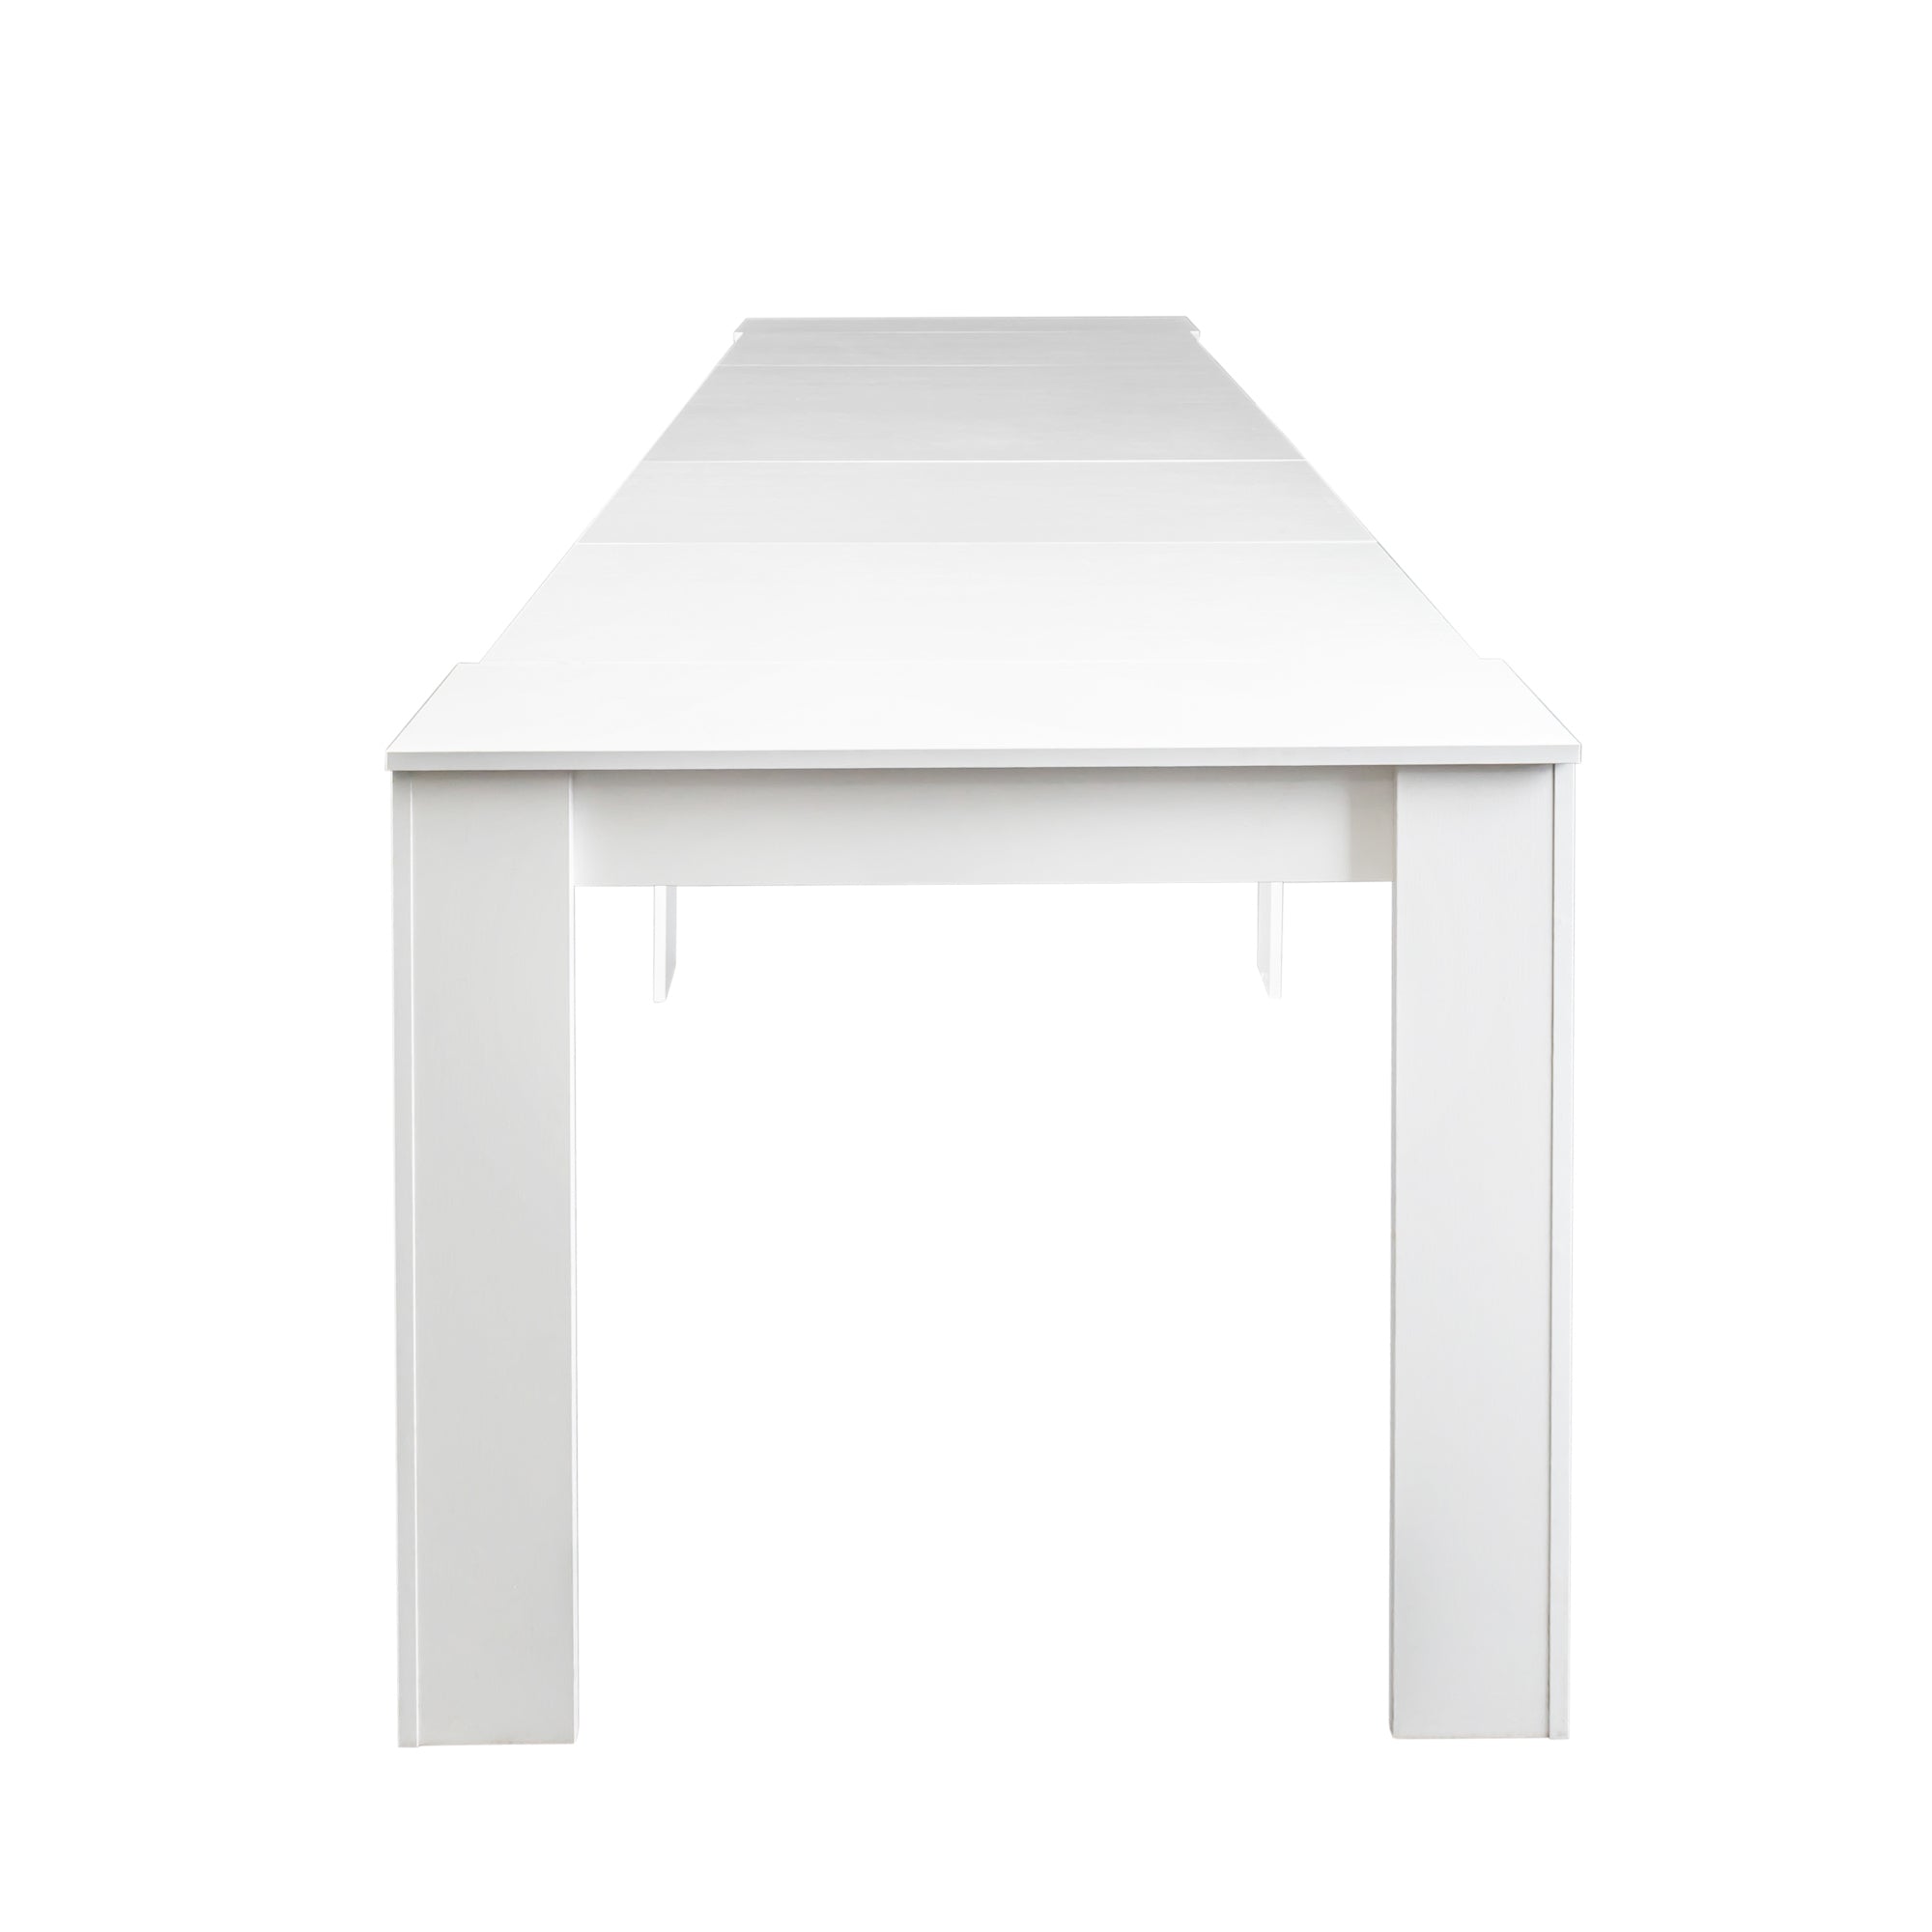 Multifunctional extendable console table - White